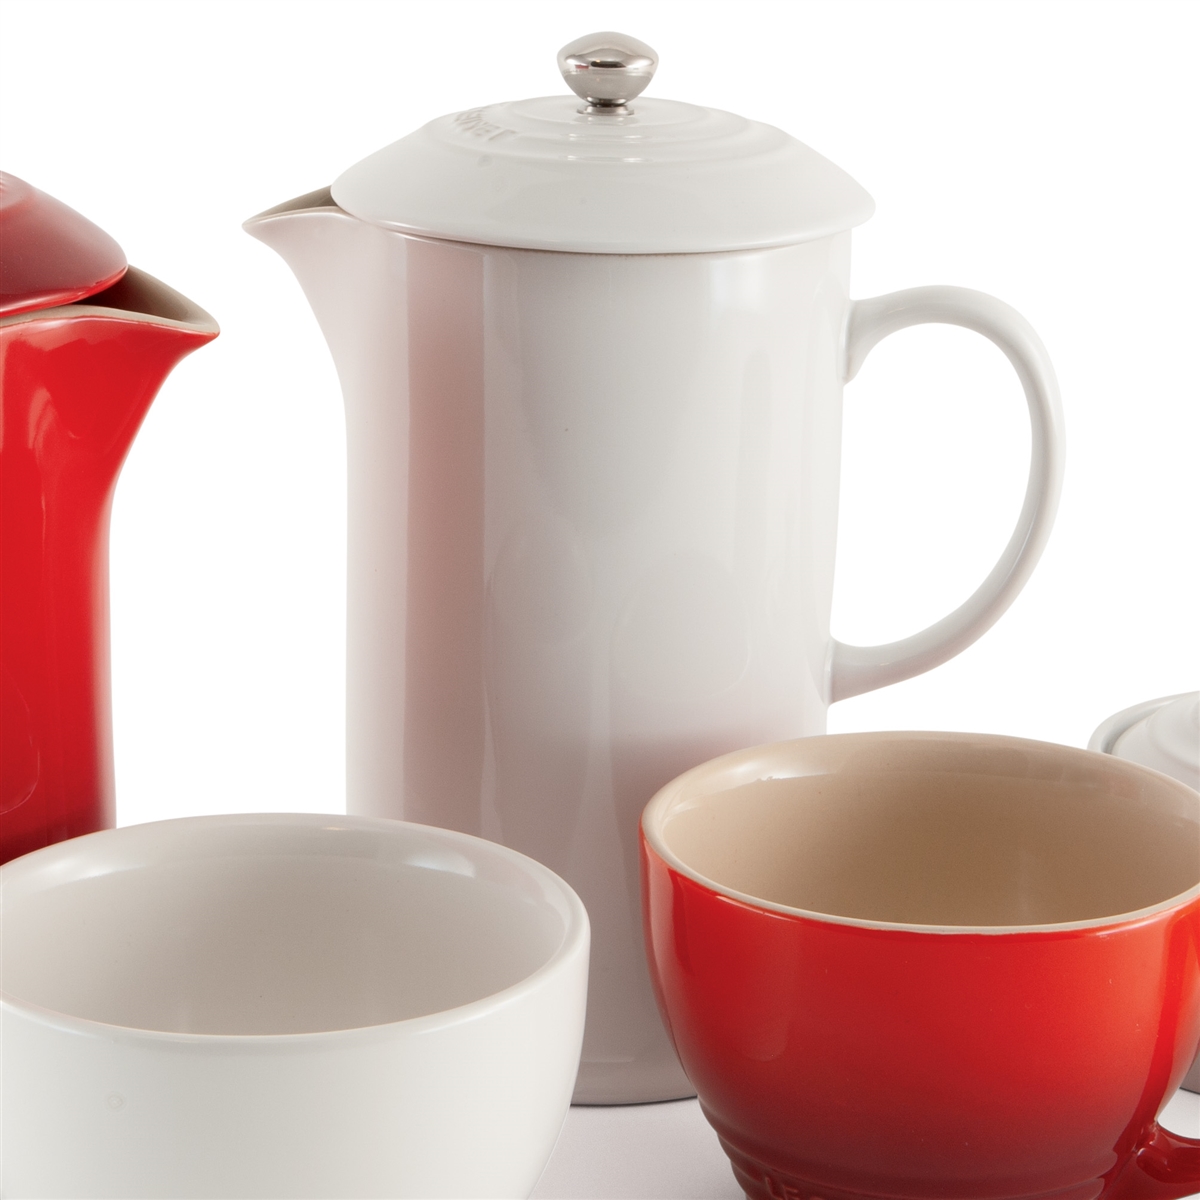 Le Creuset White French Press